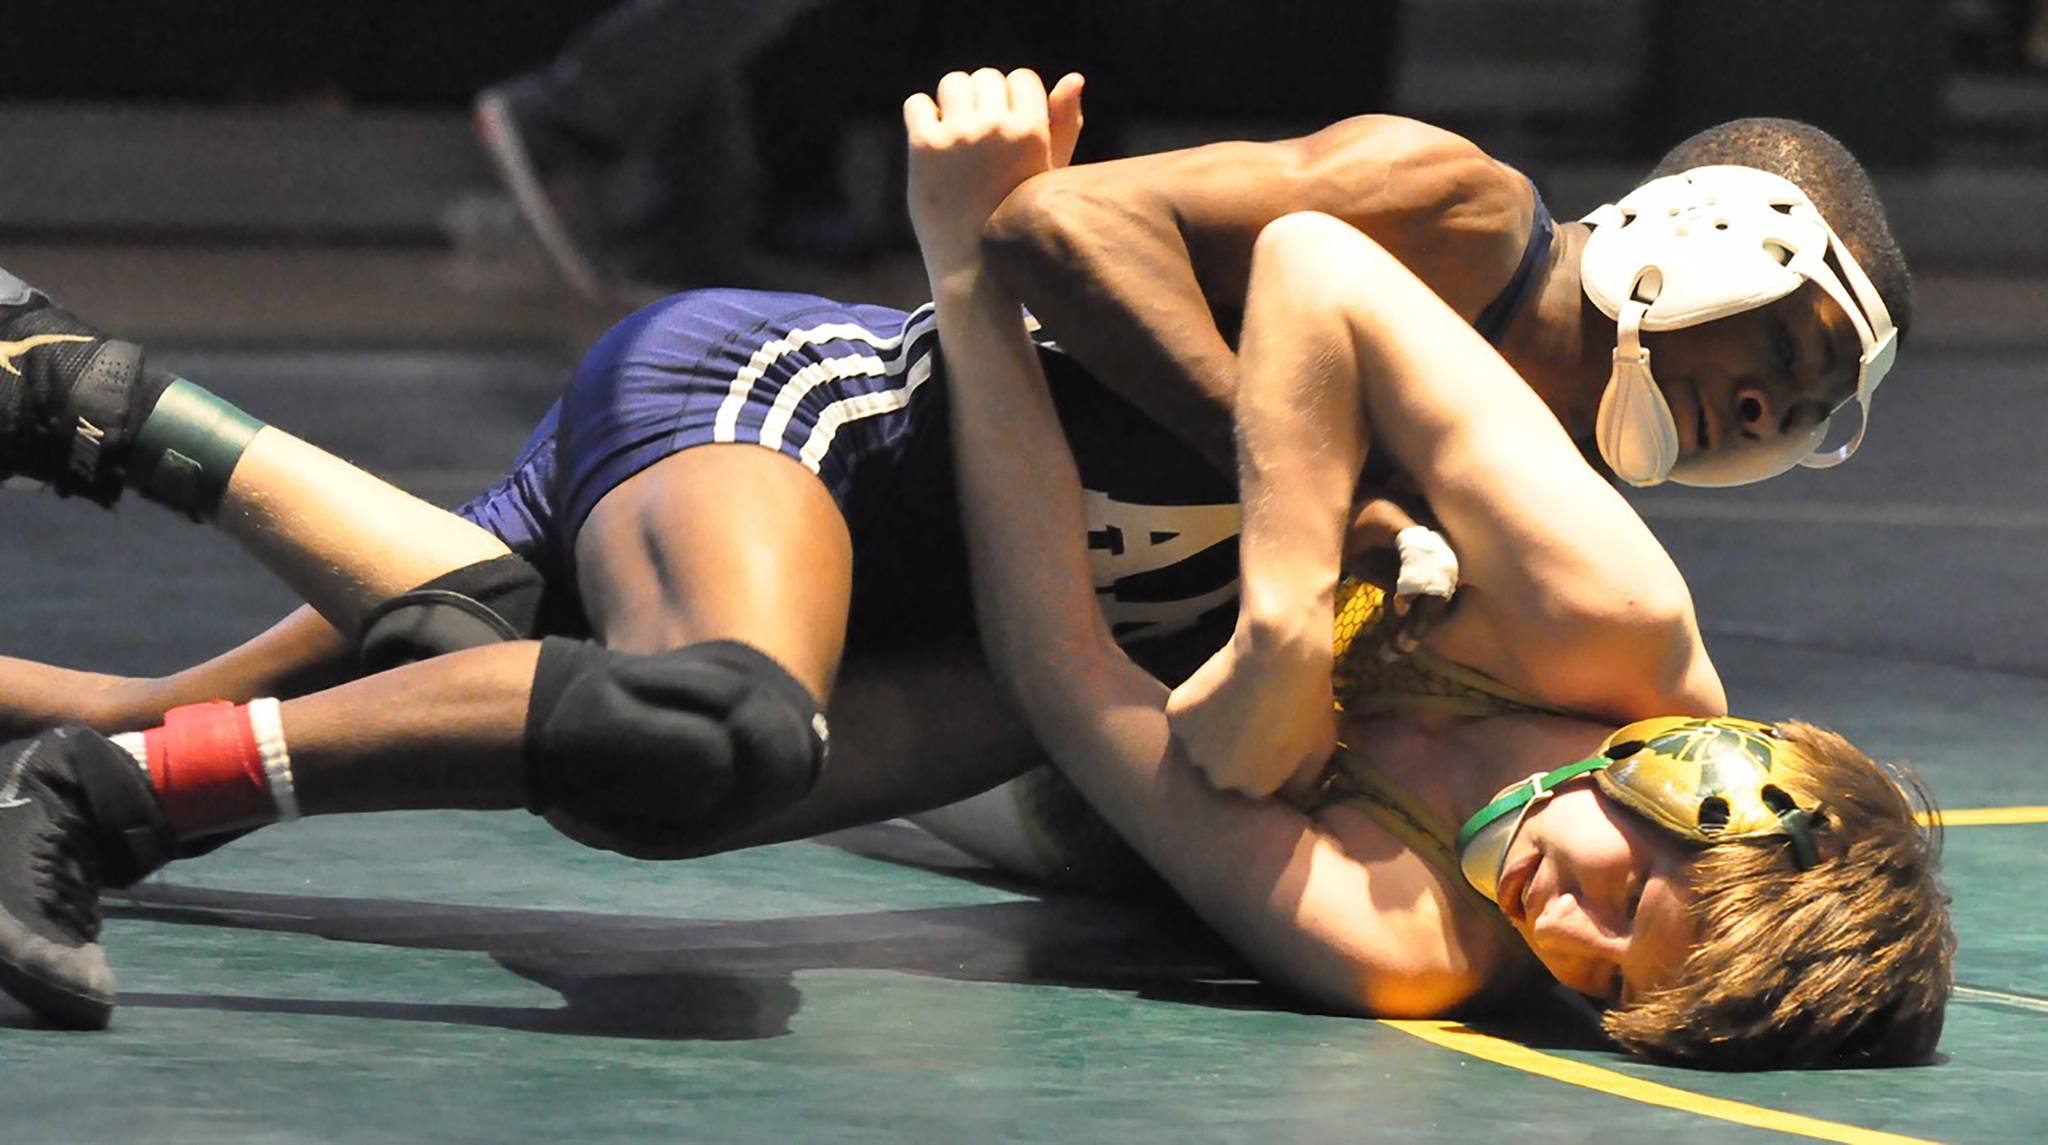 Auburn Riverside’s Yusef Nelson rides Auburn’s Jake Aplin during their 113-pound title bout at the sub-regional wrestling tournament at Auburn High School on Saturday. Nelson posted a 13-5 decision. RACHEL CIAMPI, Auburn Reporter